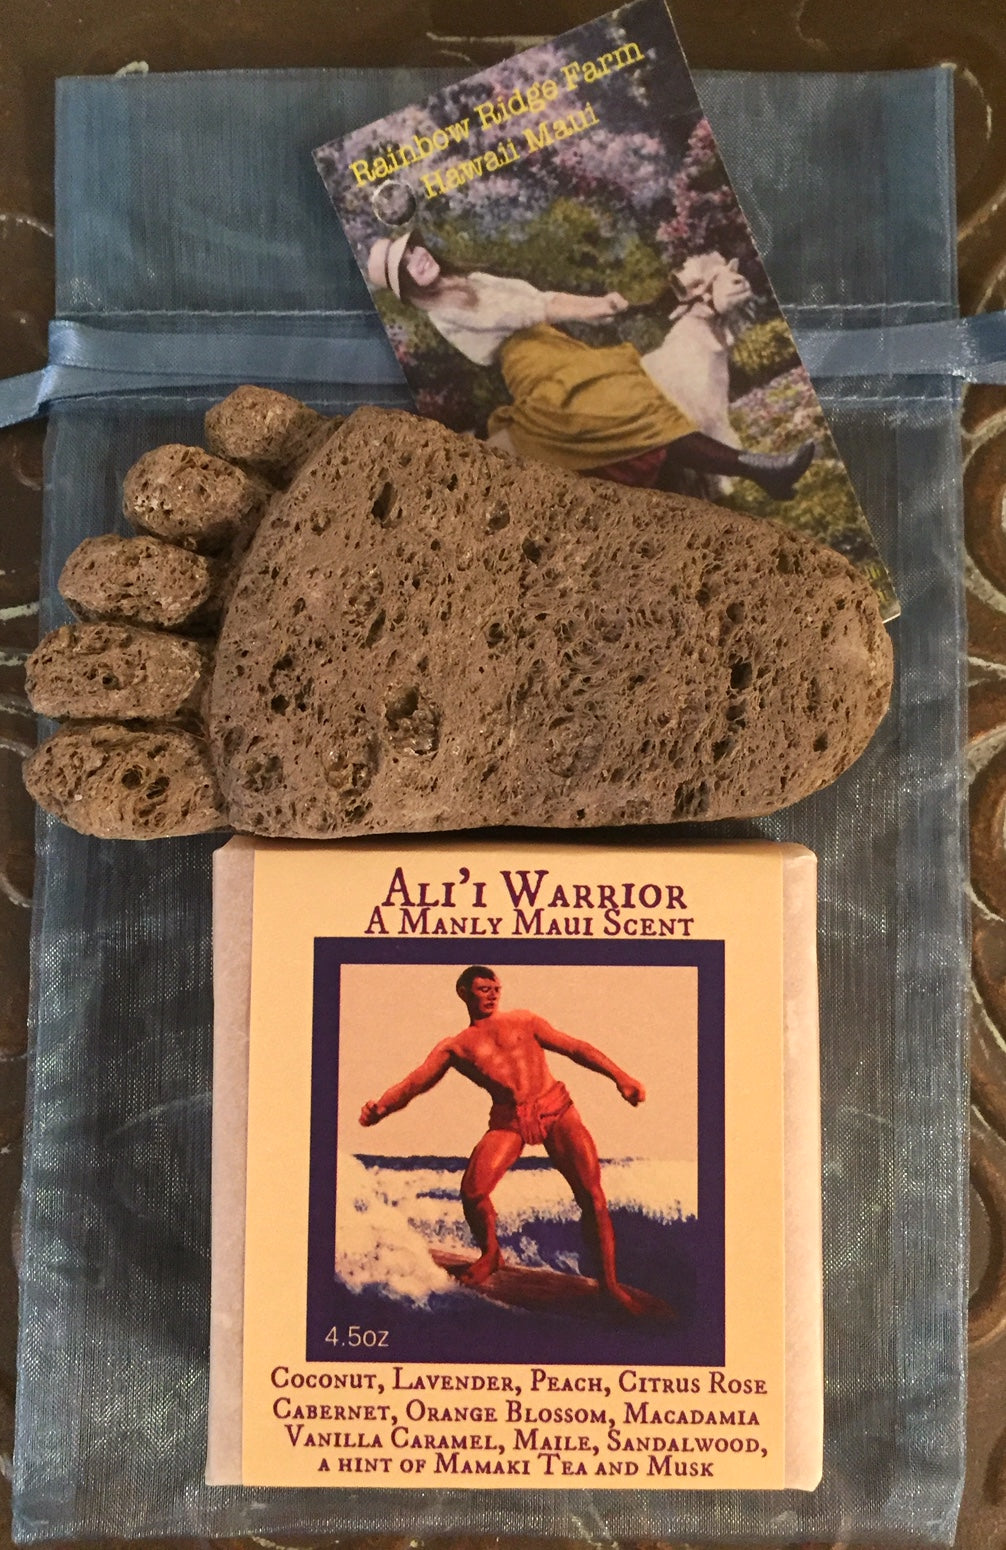 Ali'i Warrior Goat Milk Soap with a Hand-Craved Pumice Foot in an Organza Bag.